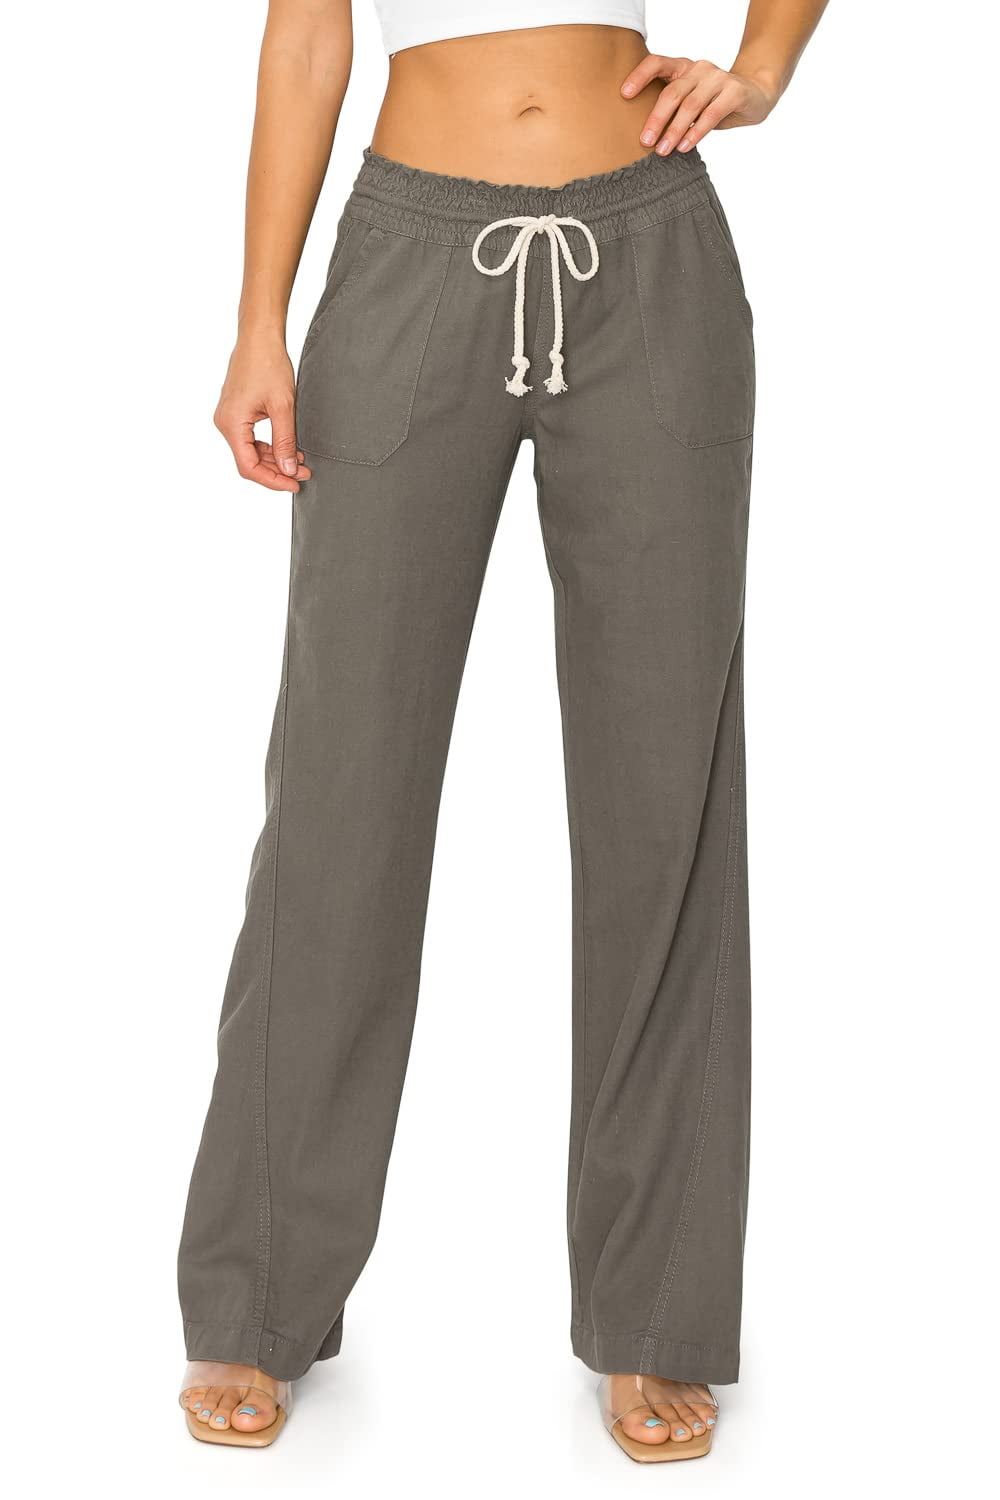 Cali1850 Women's Casual Linen Pants - 32 Inseam Oceanside Drawstring  Smocked Waist Lounge Beach Trousers with Pockets 7024Z-LNN Olive XL 